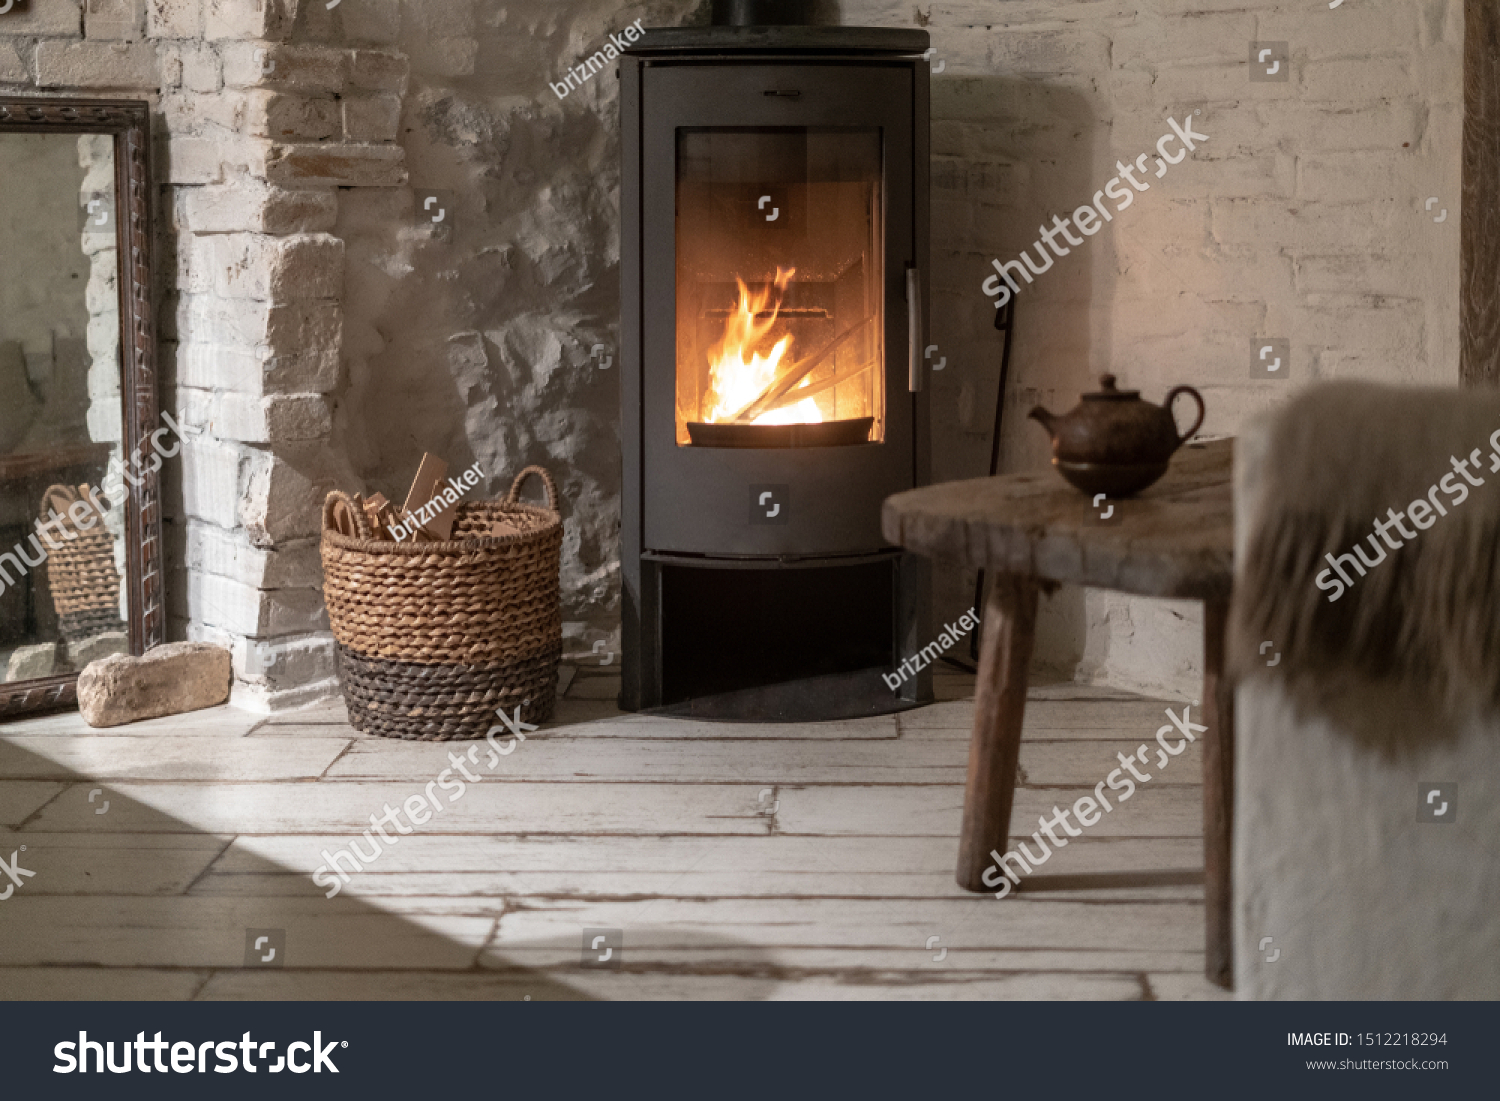 Wicker basket with firewood near fire chimney. Wood stove fireplace with metal body and glass door in comfort house with cozy interior in room #1512218294